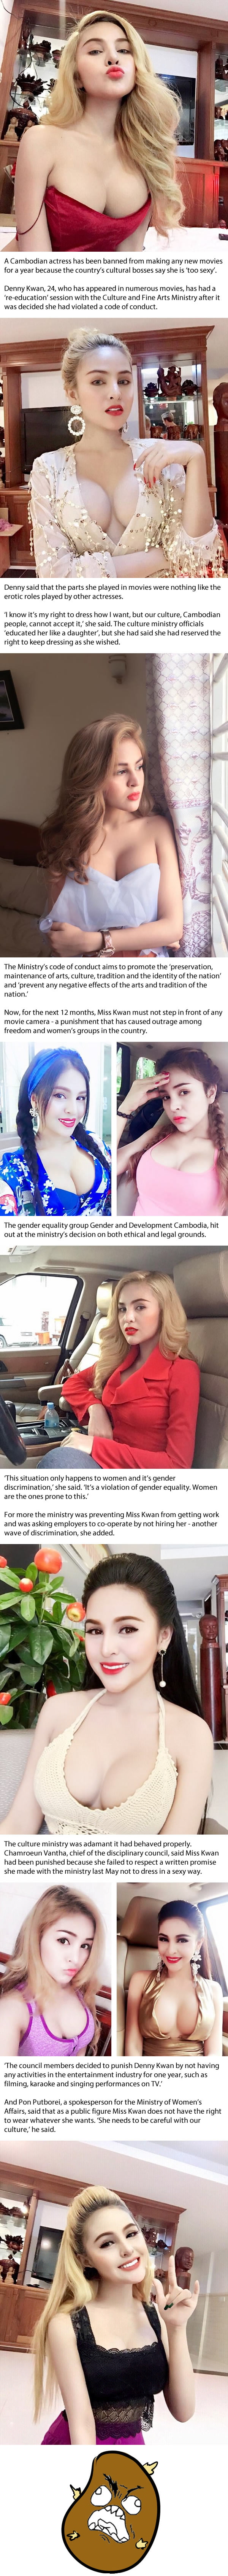 Cambodian actress is banned from making new movies for a year because culture bosses say she is 'too sexy'